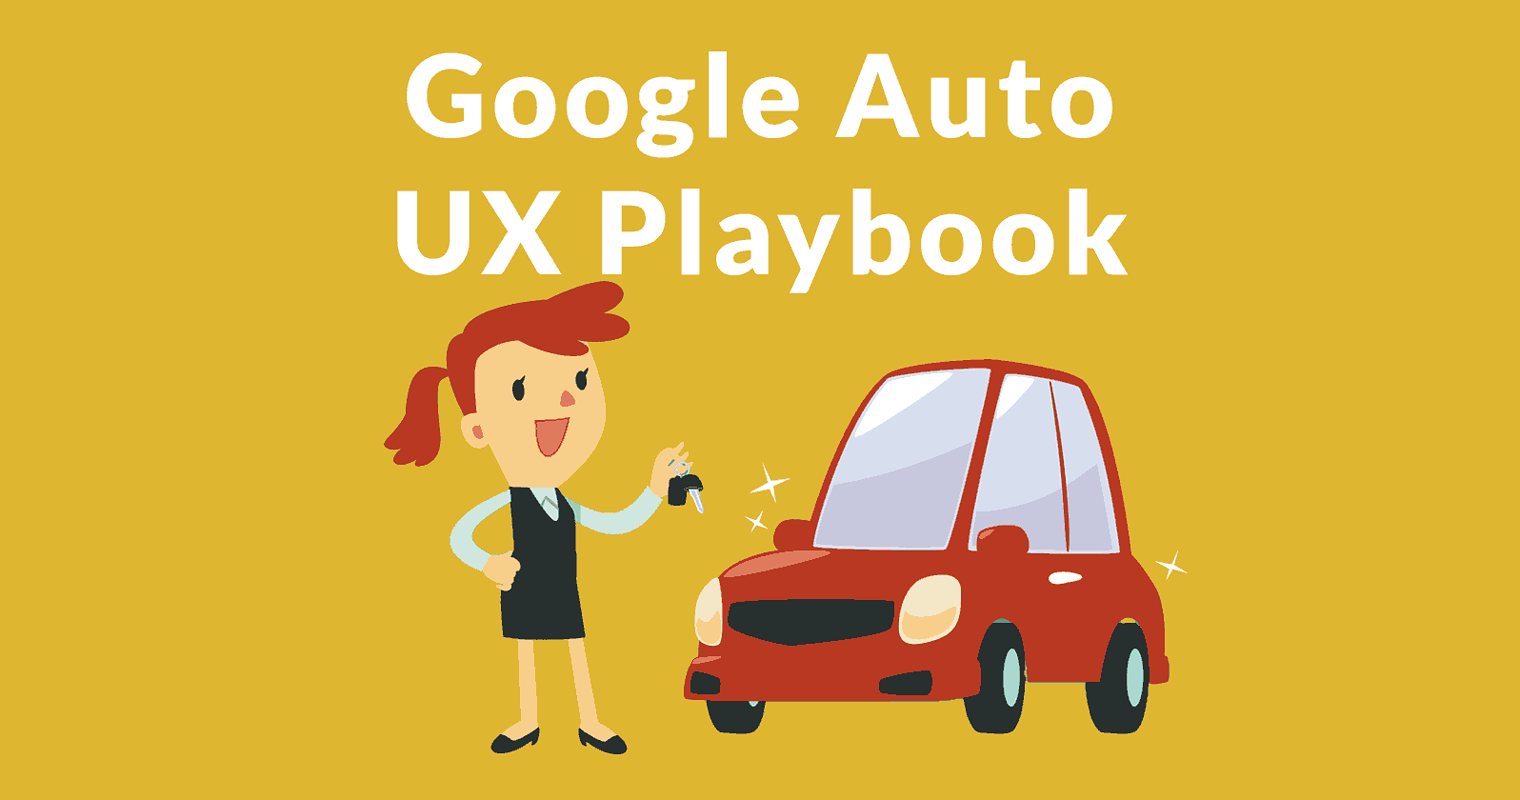 New Google UX Playbook Leaked – Autos